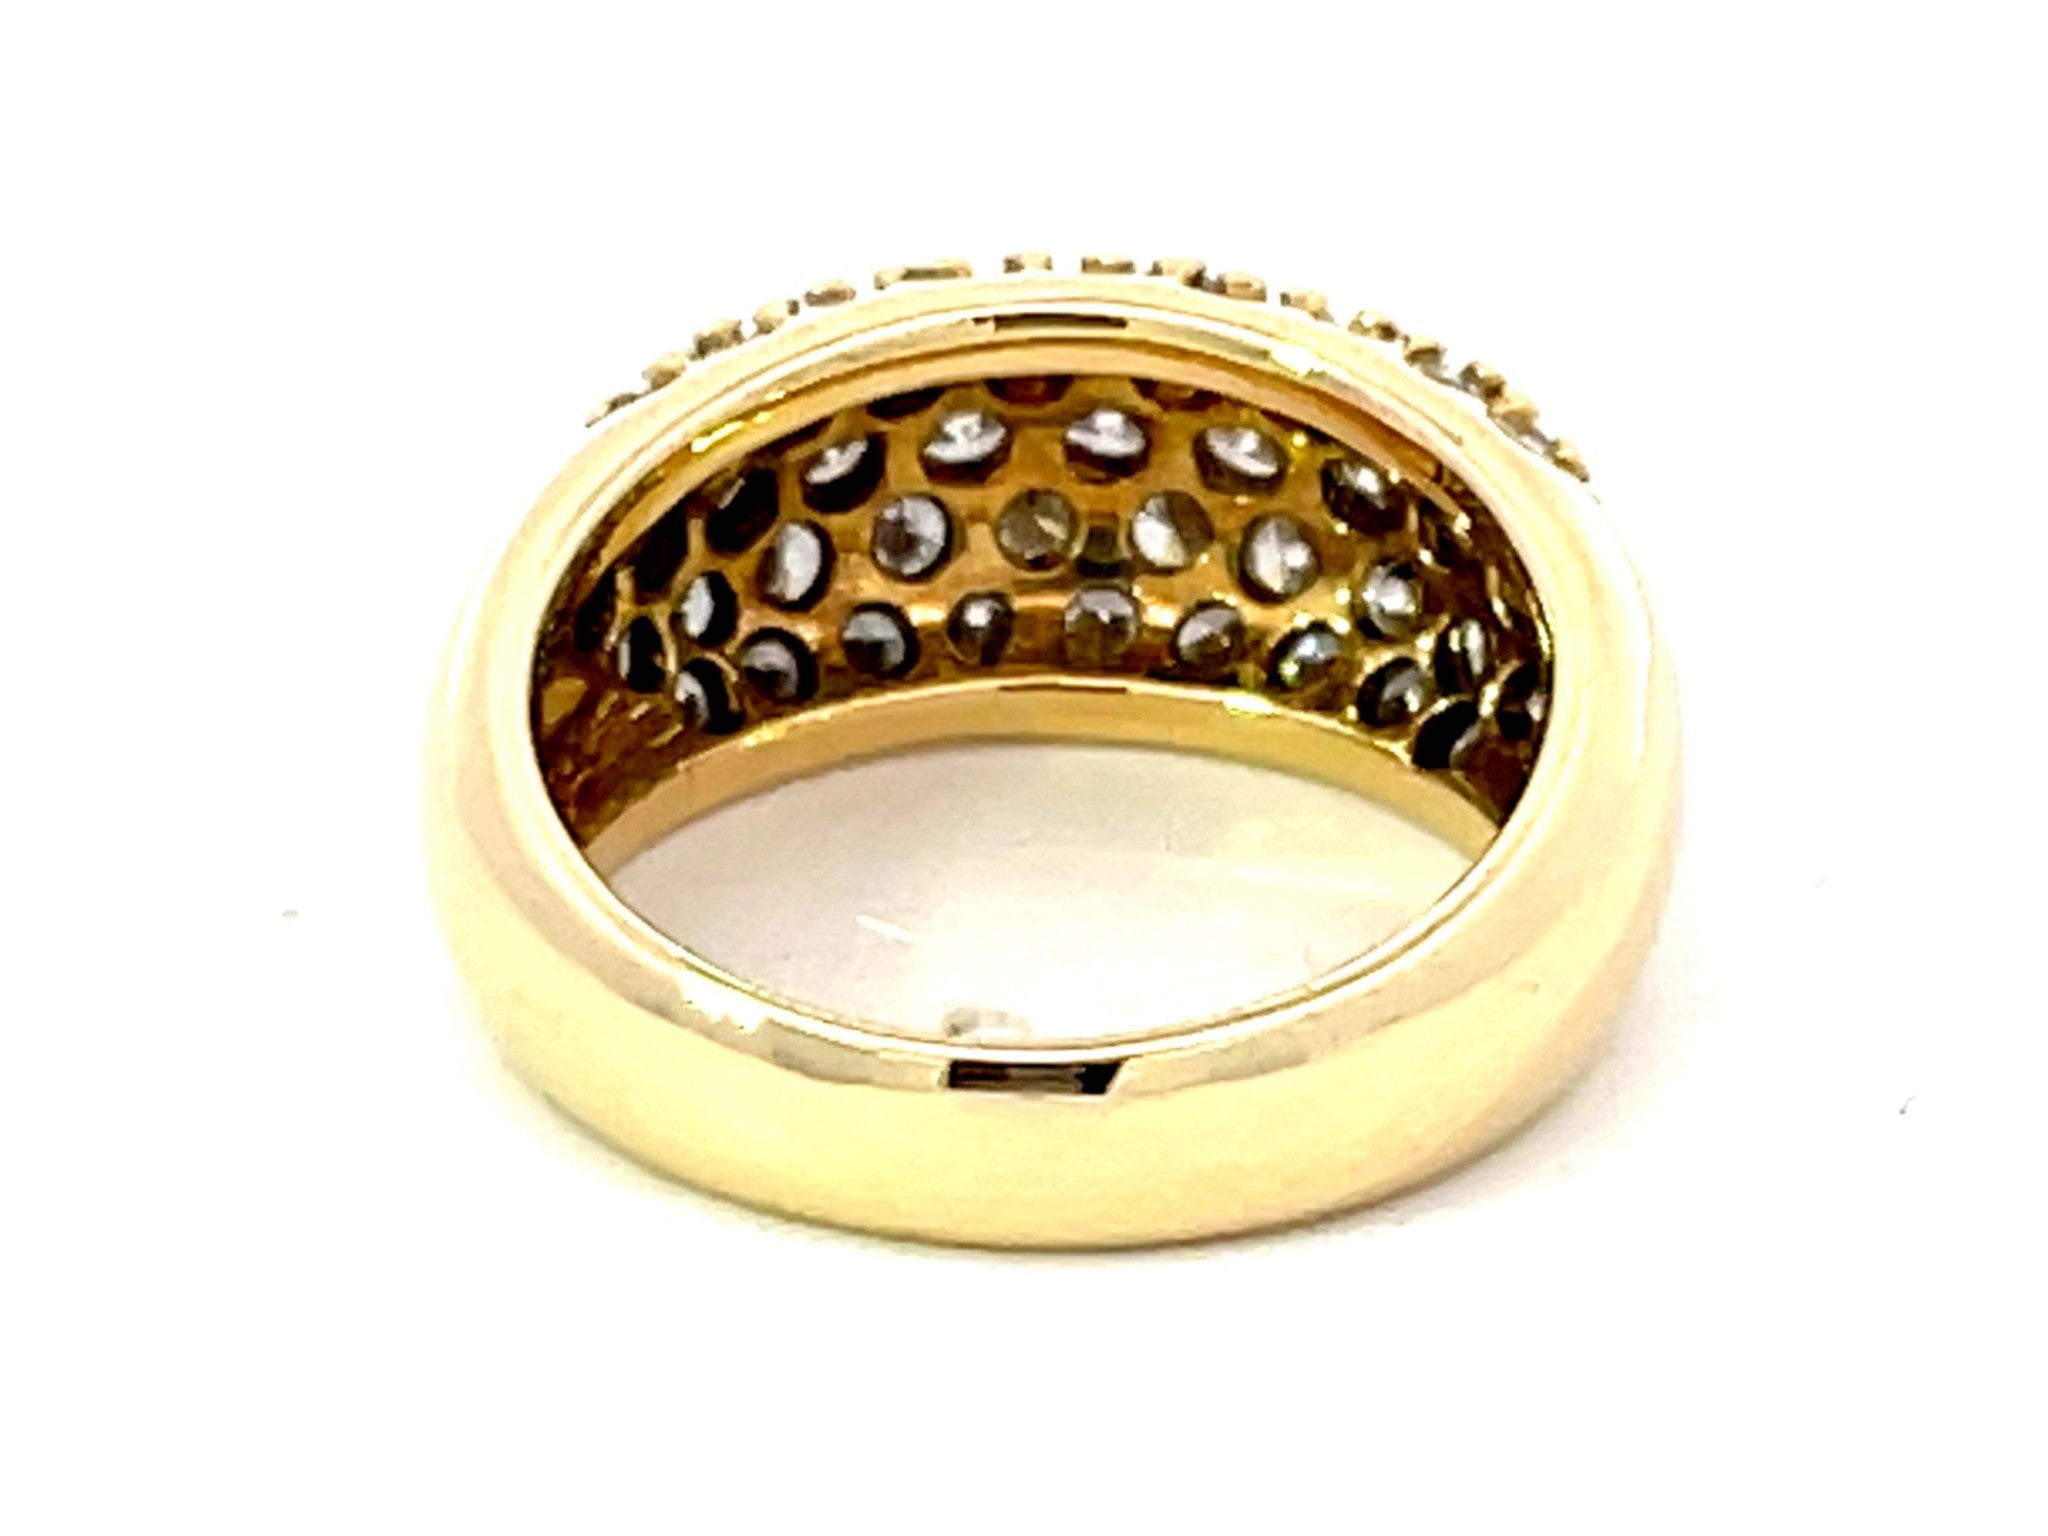 Diamond Dome Band Ring in 18k Yellow Gold